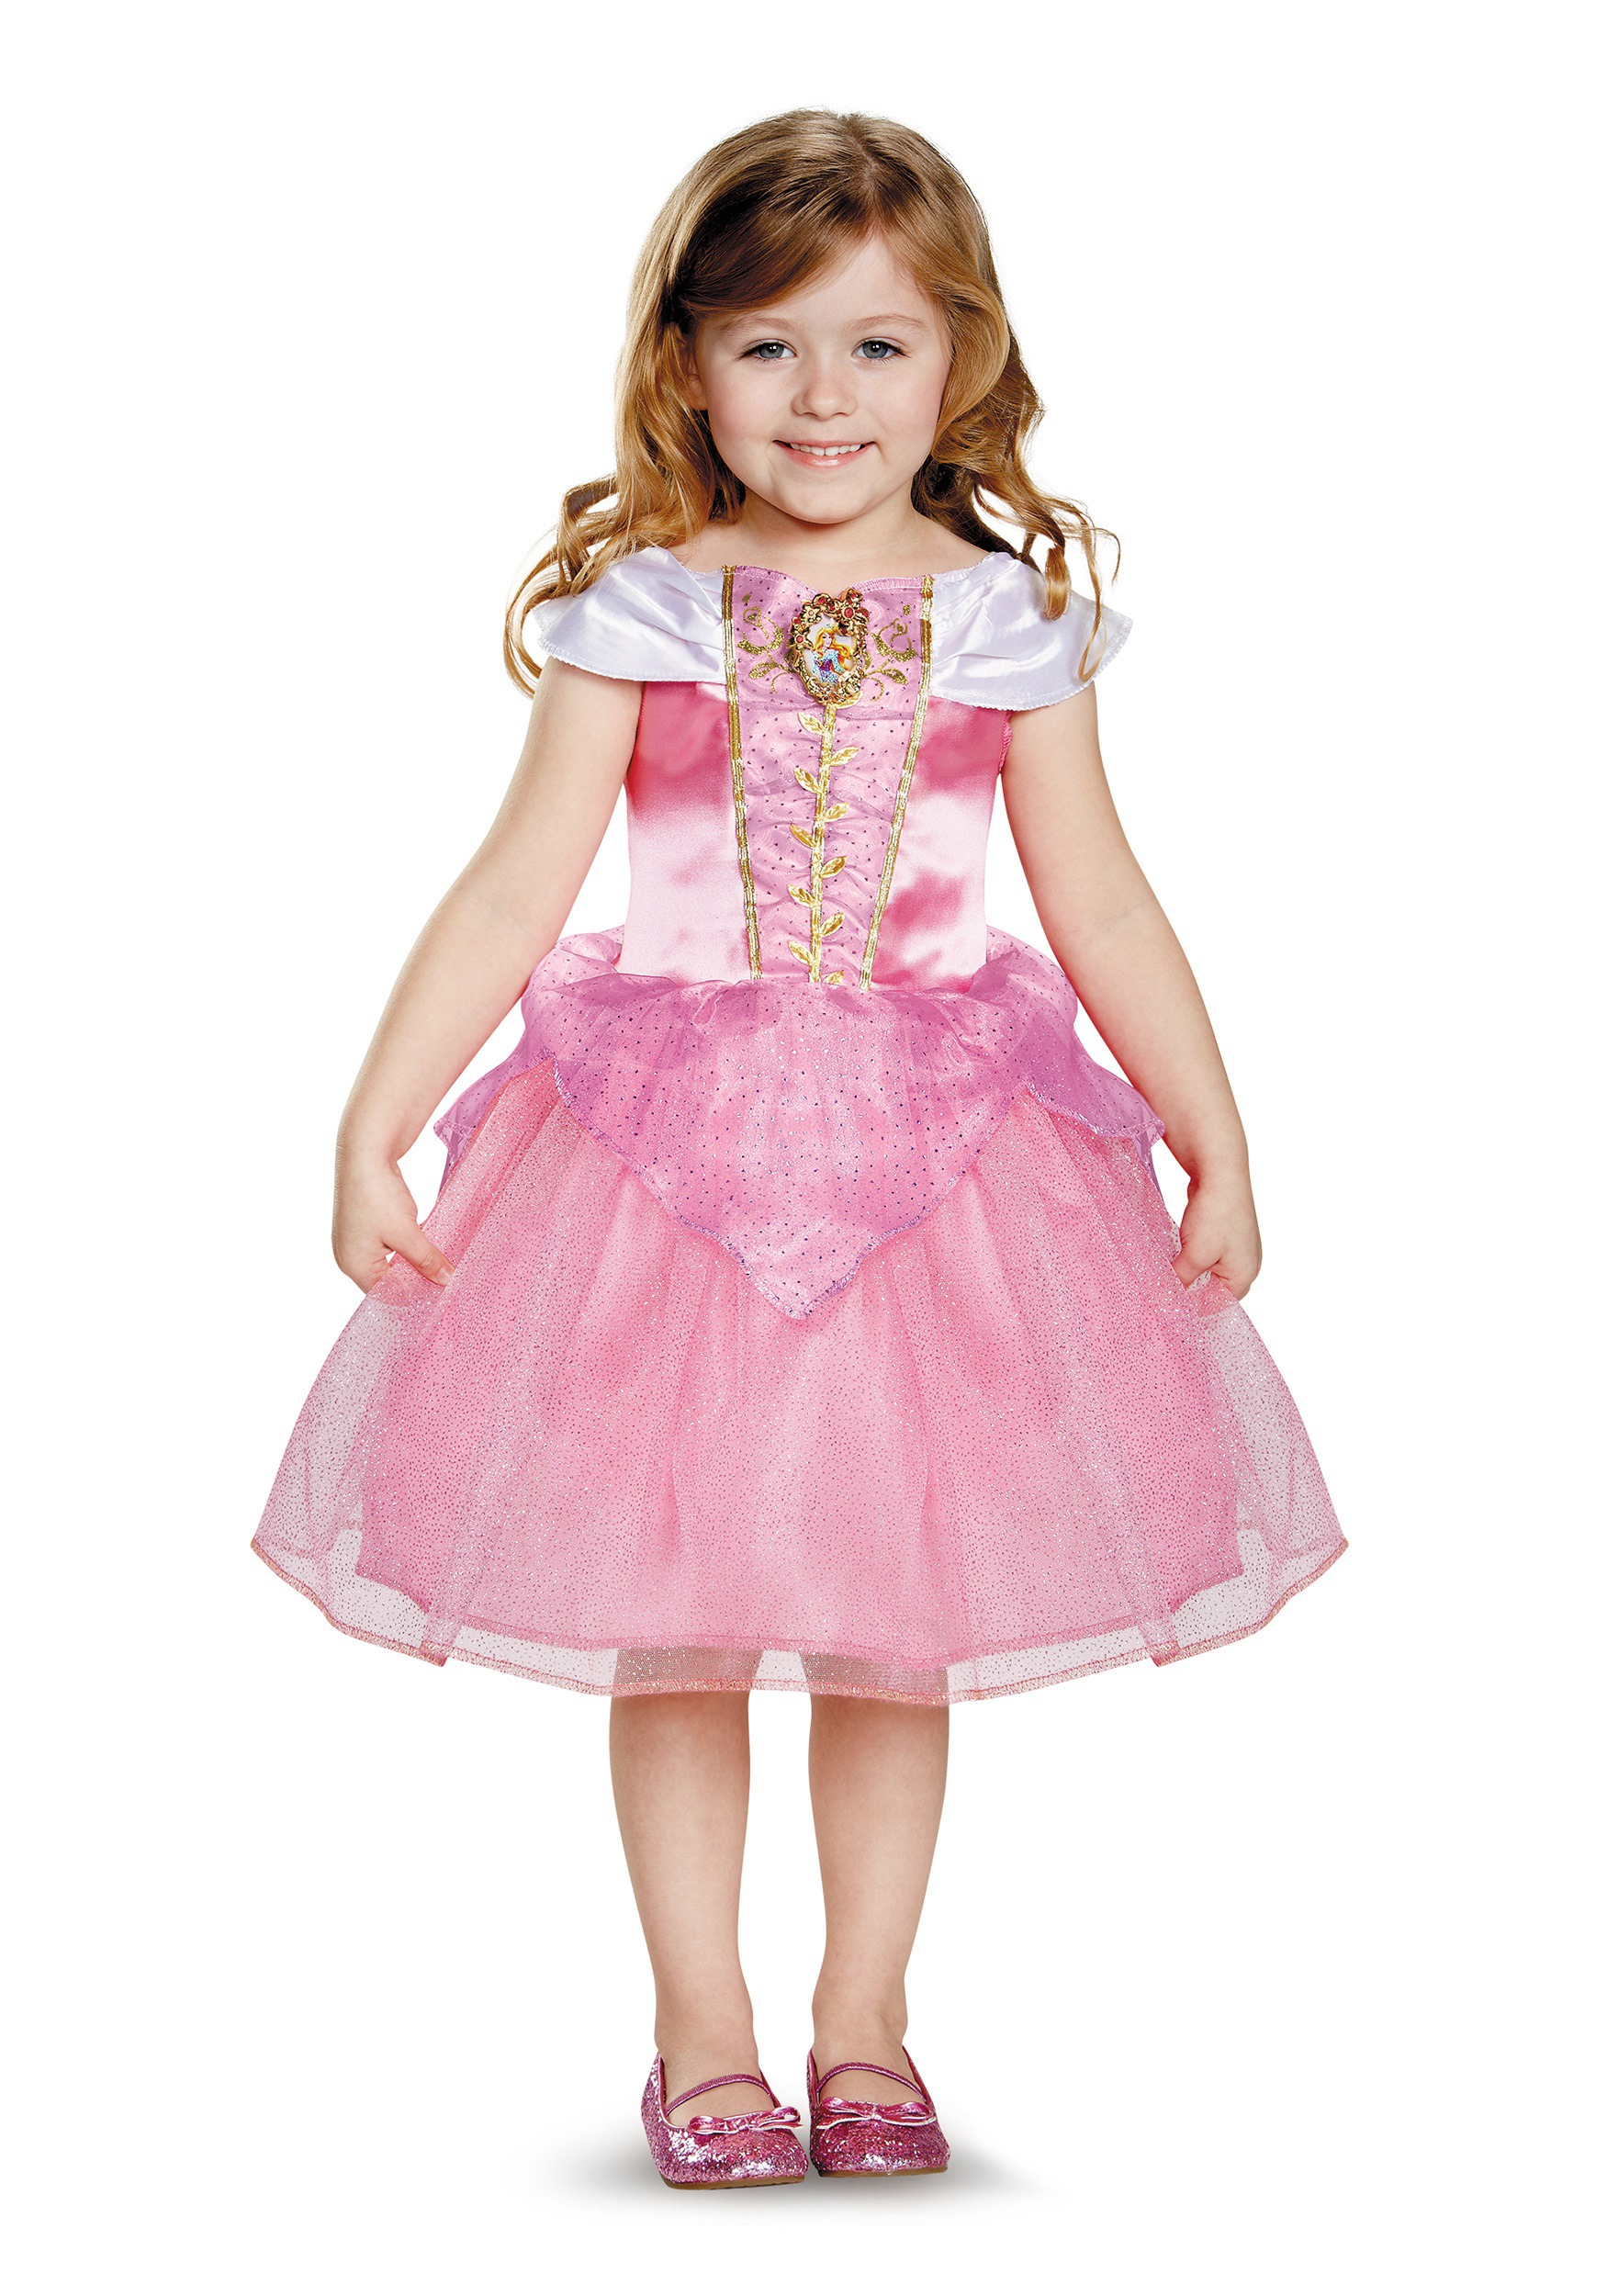 Photos - Fancy Dress Aurora Disguise  Classic Toddler Costume Pink/White 